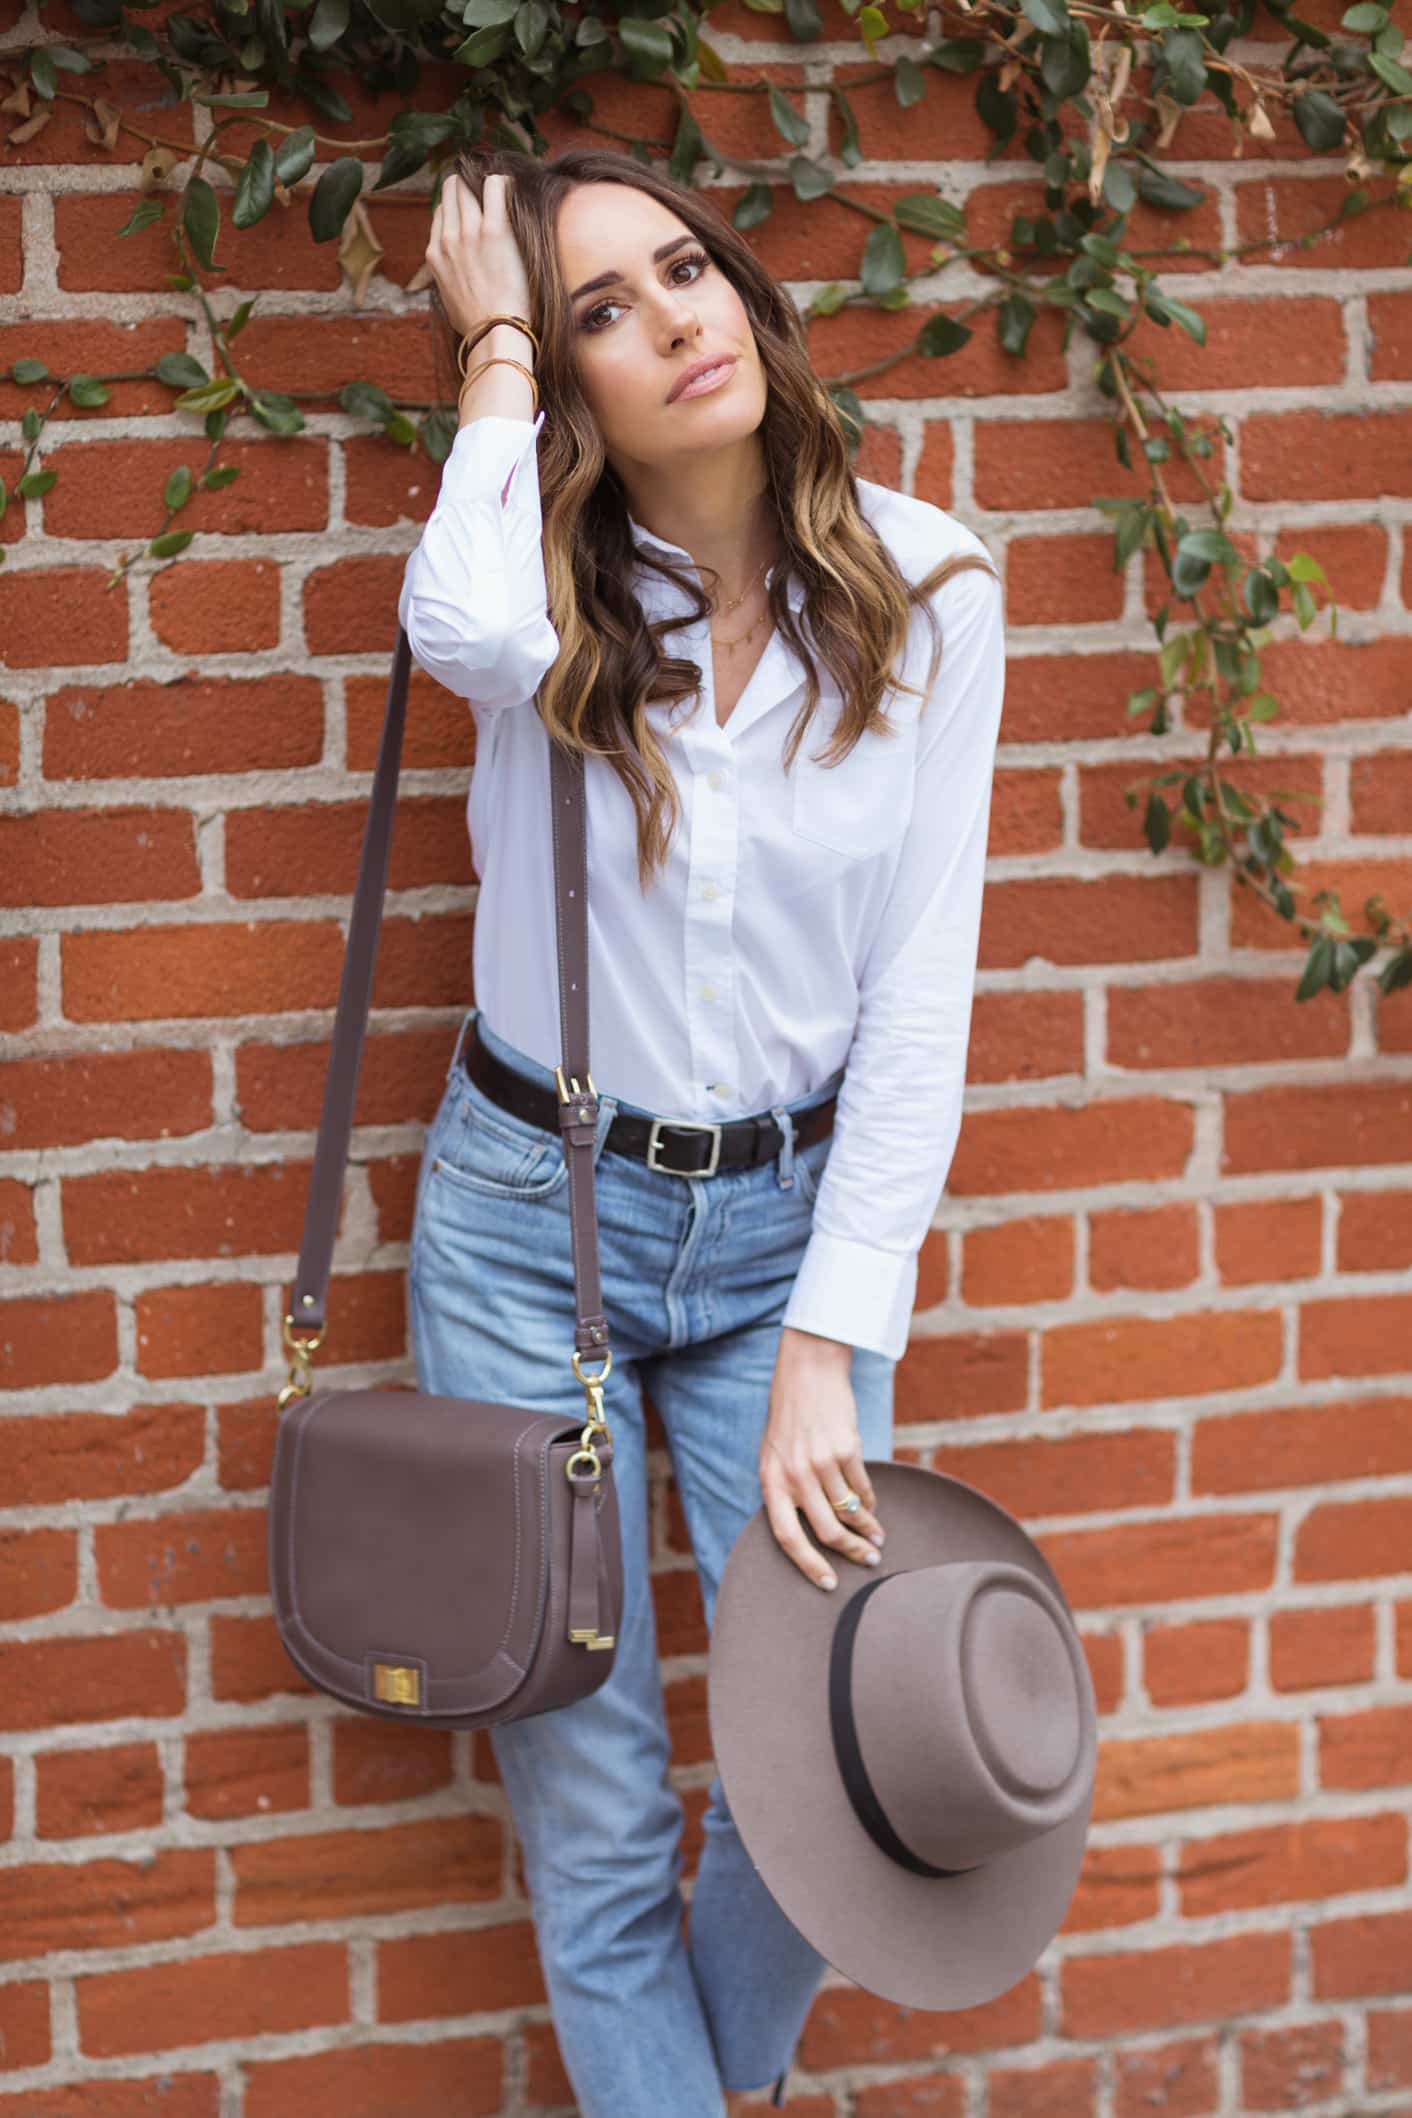 Louise Roe wearing Brahmin crossbody bag with jeans and white